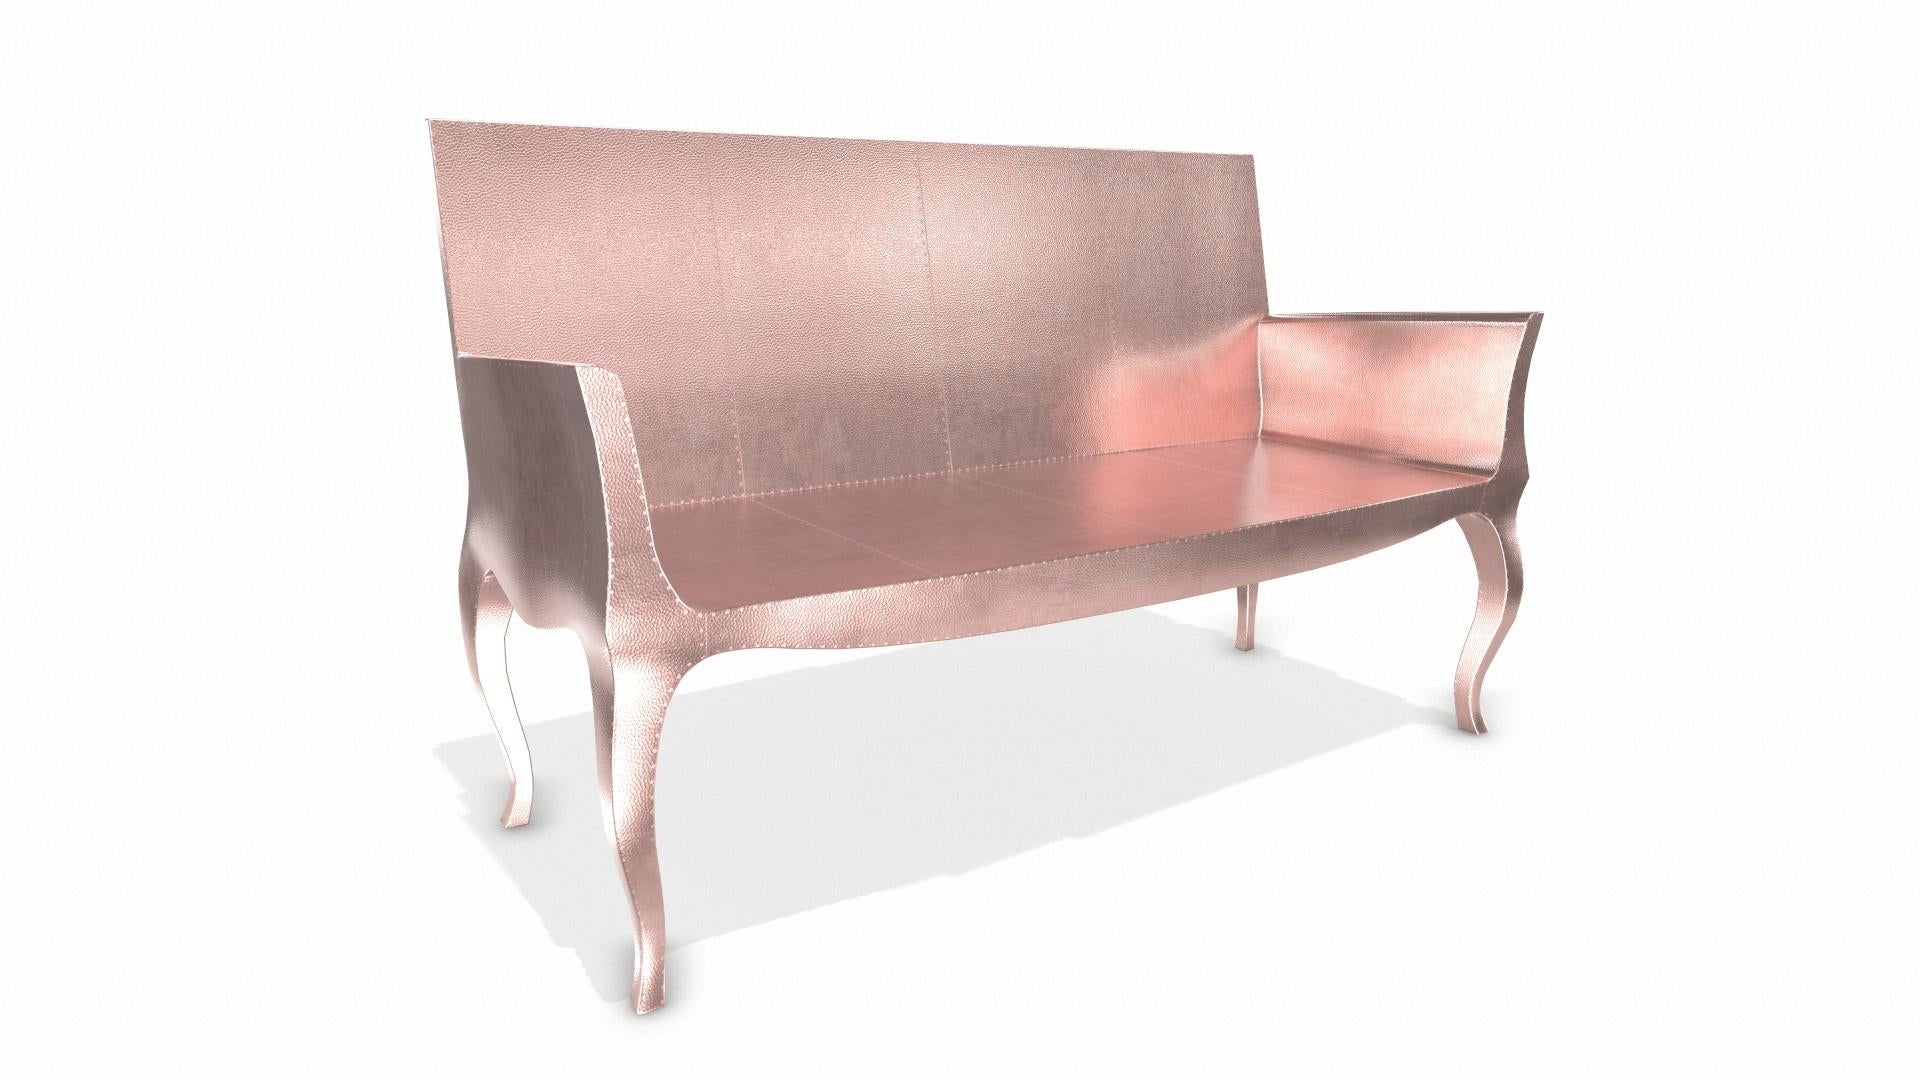 Contemporary Louise Settee Art Deco Benches in Mid. Hammered Copper by Paul Mathieu For Sale